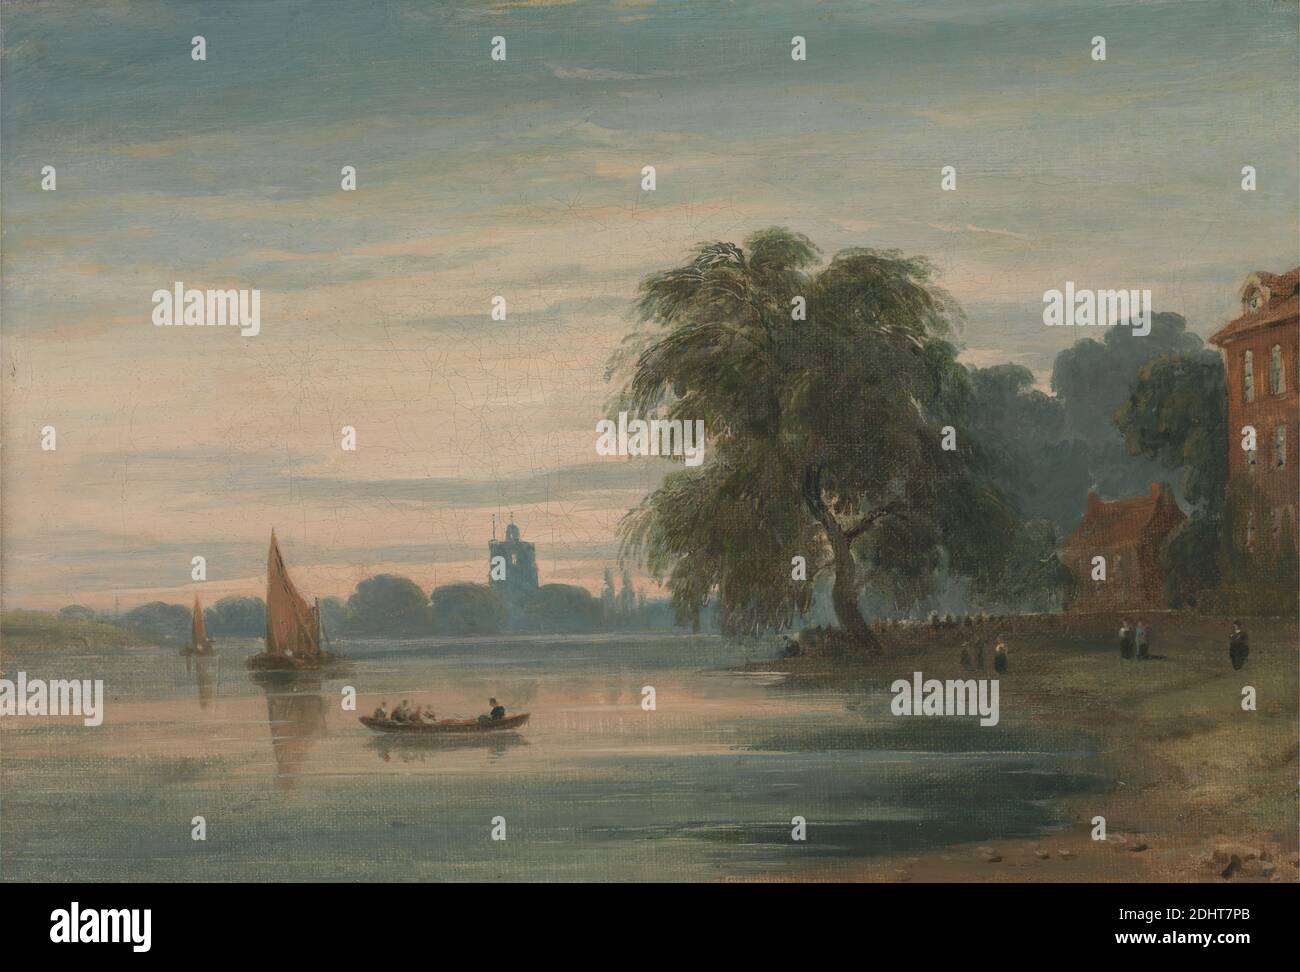 A View along the Thames towards Chelsea Old Church, John Varley, 1778–1842, British, between 1810 and 1815, Oil on canvas, Support (PTG): 8 x 11 1/2 inches (20.3 x 29.2 cm), boats, buildings, church, cityscape, landscape, men, river, riverbank, rowboat, sailboats, sky, trees, view, wall, water, women, Chelsea, England, Greater London, Thames, United Kingdom Stock Photo